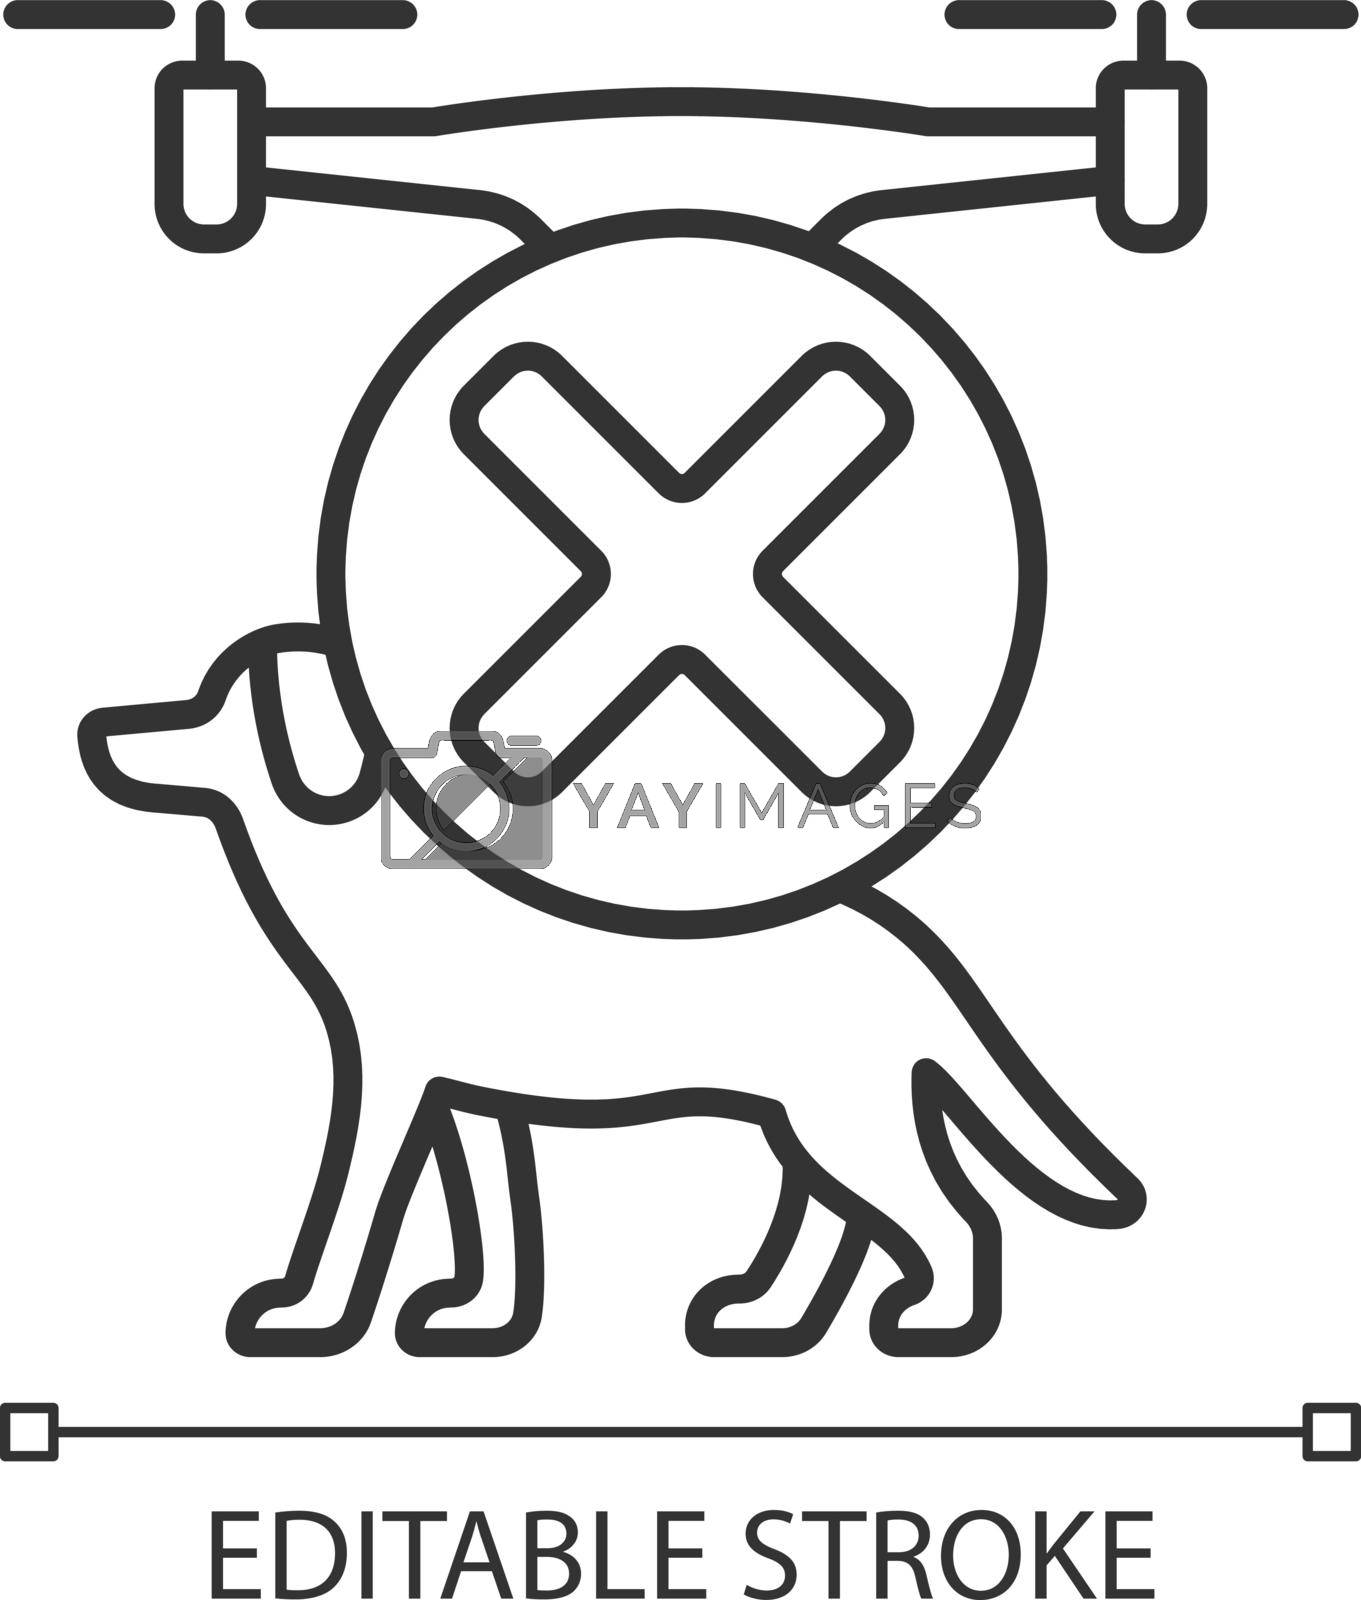 Royalty free image of Dont fly above animals linear manual label icon by bsd